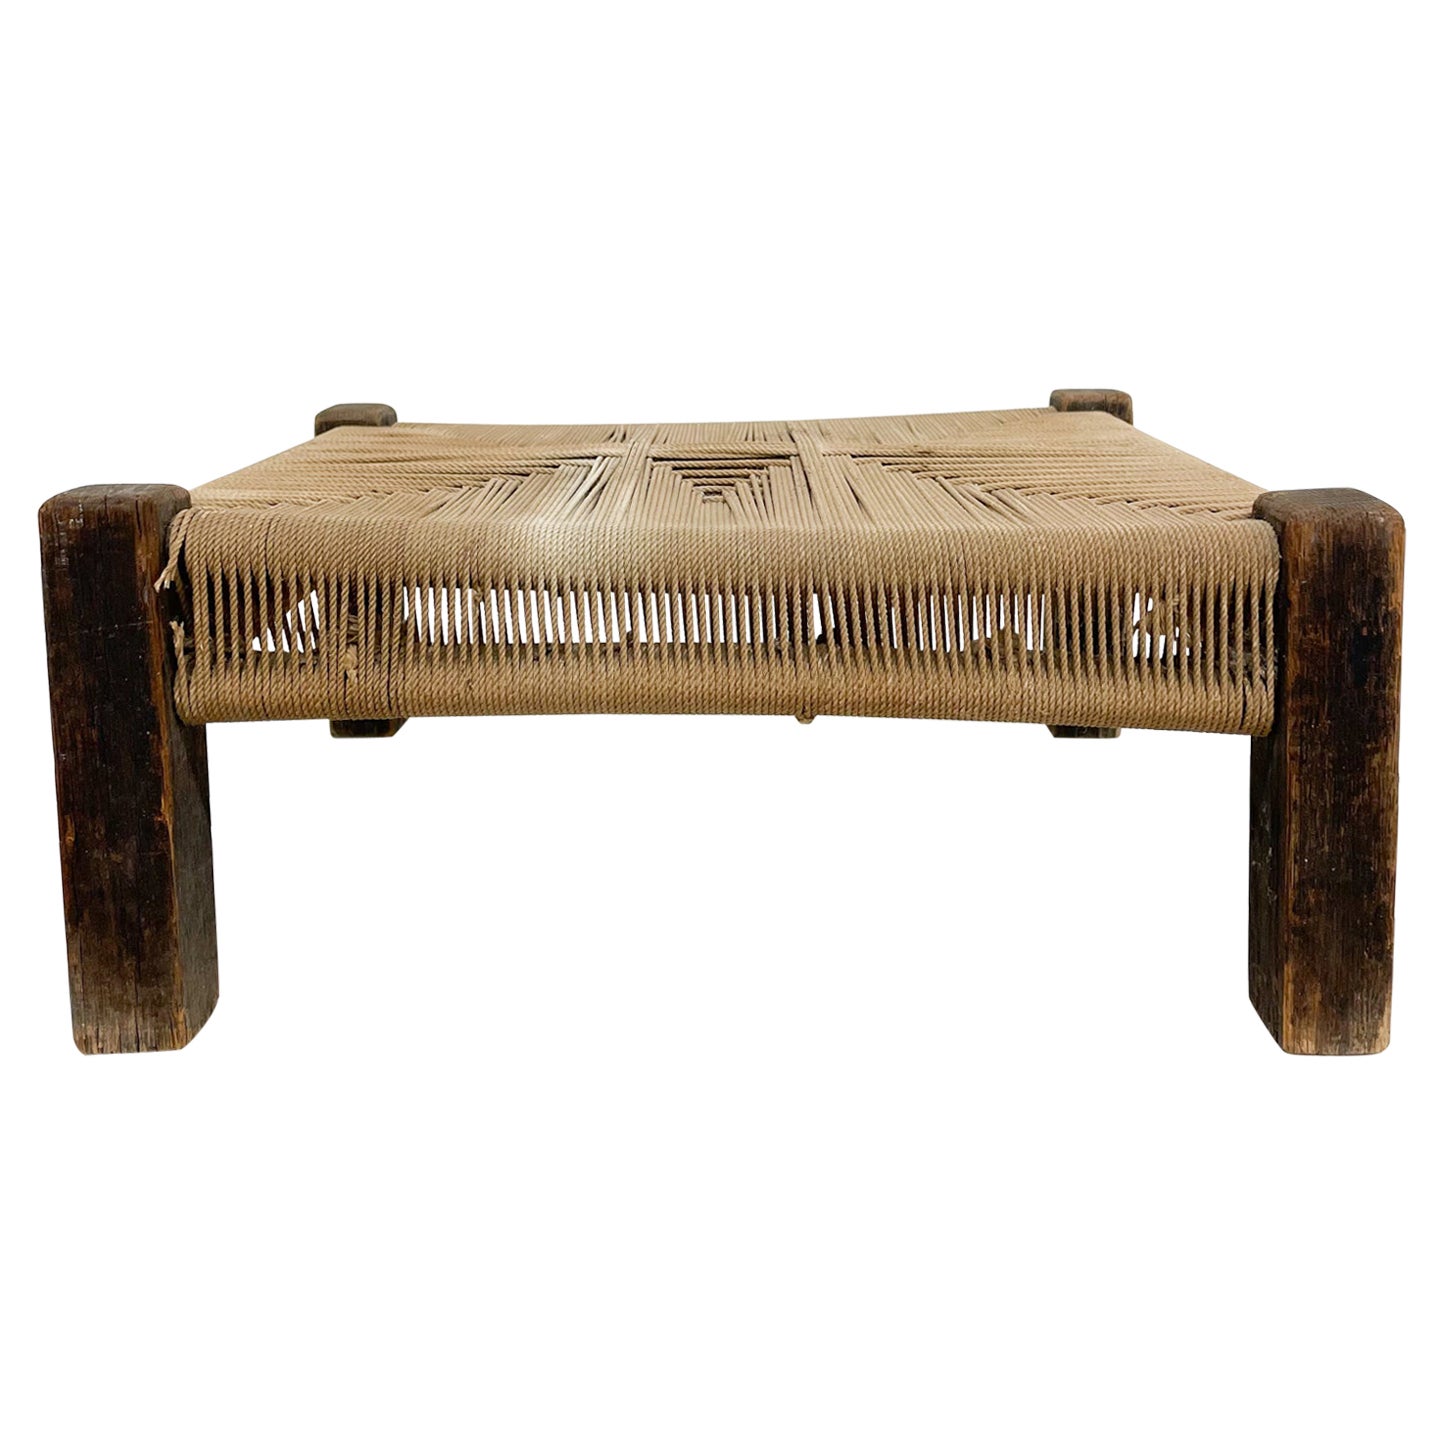 Rustic Low-Profile Stool in Woven Rope on Wood Frame Arts & Crafts For Sale